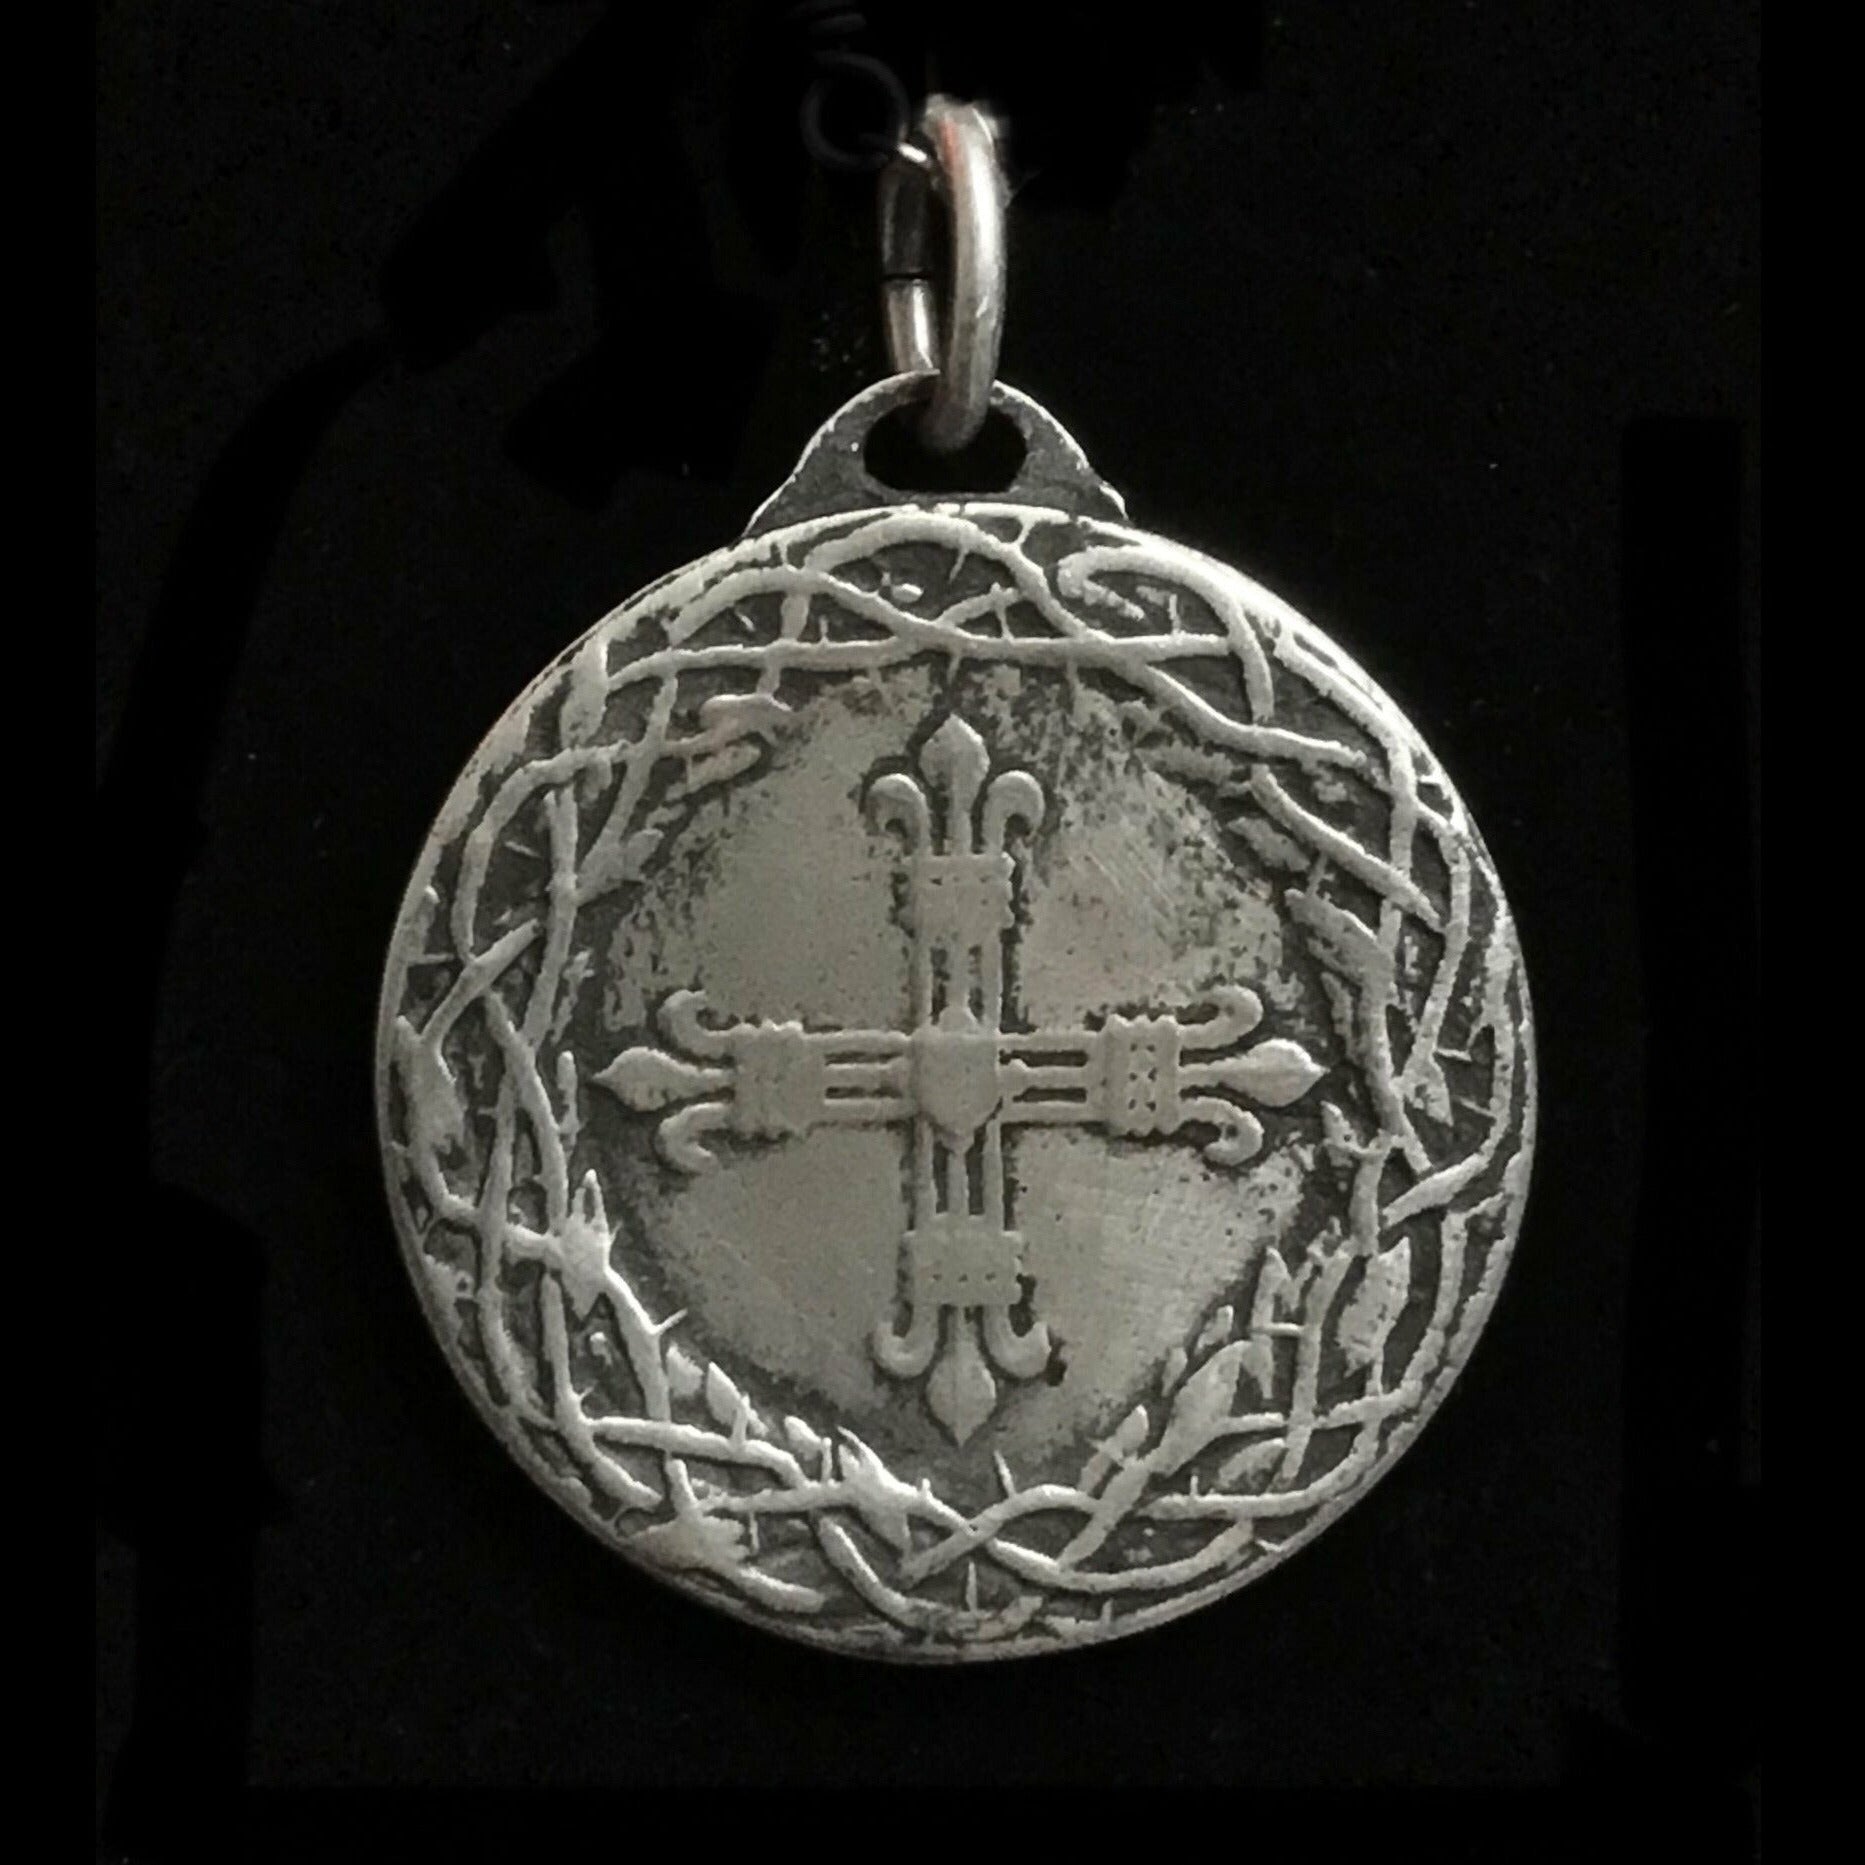 Joan of Arc the Liberator Medal Necklace - Sterling Silver